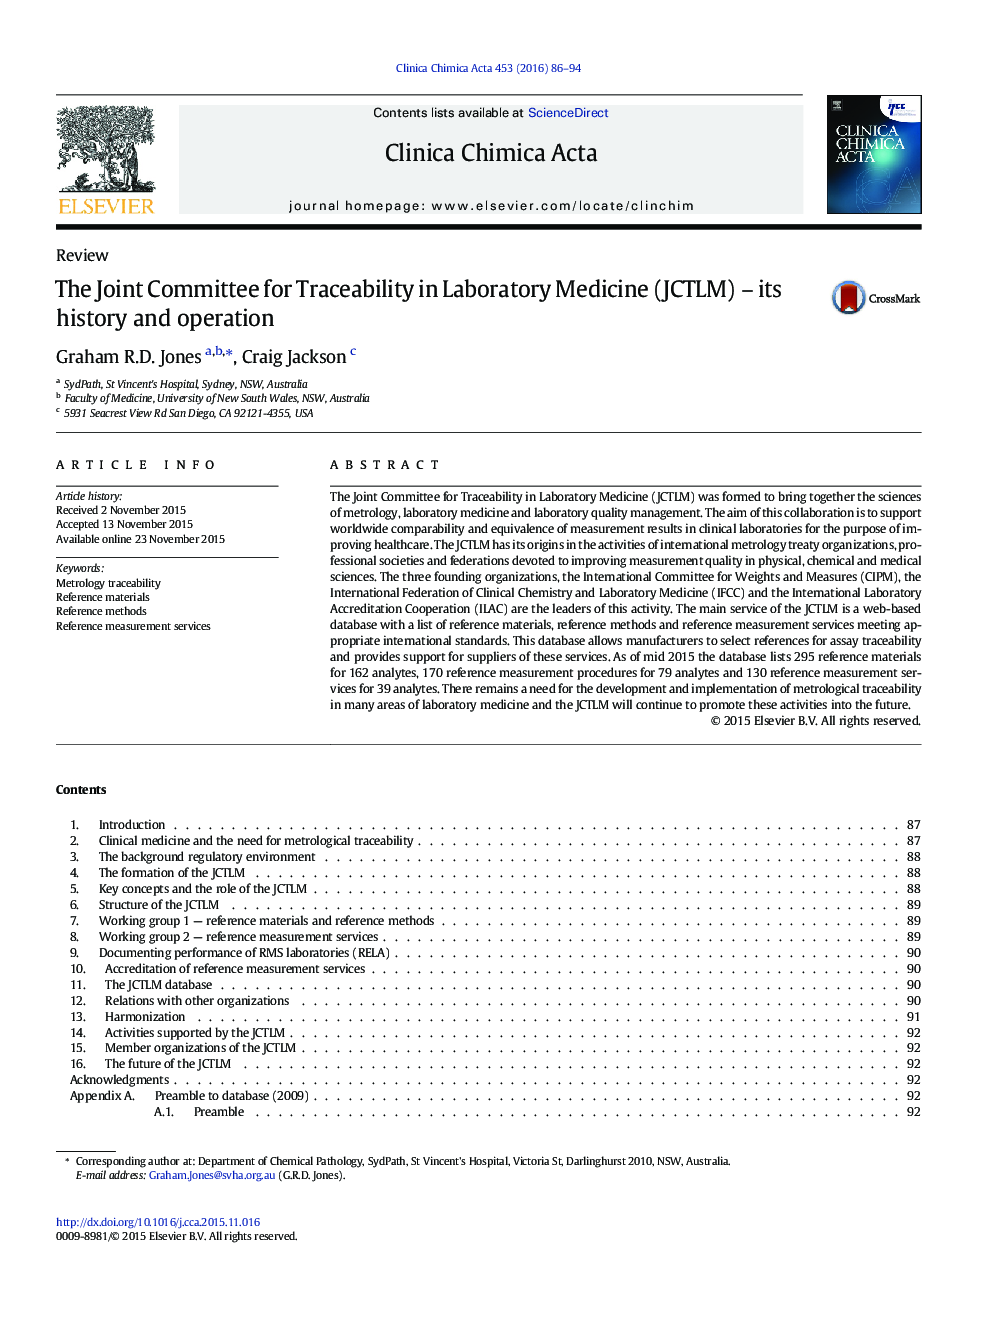 The Joint Committee for Traceability in Laboratory Medicine (JCTLM) – its history and operation